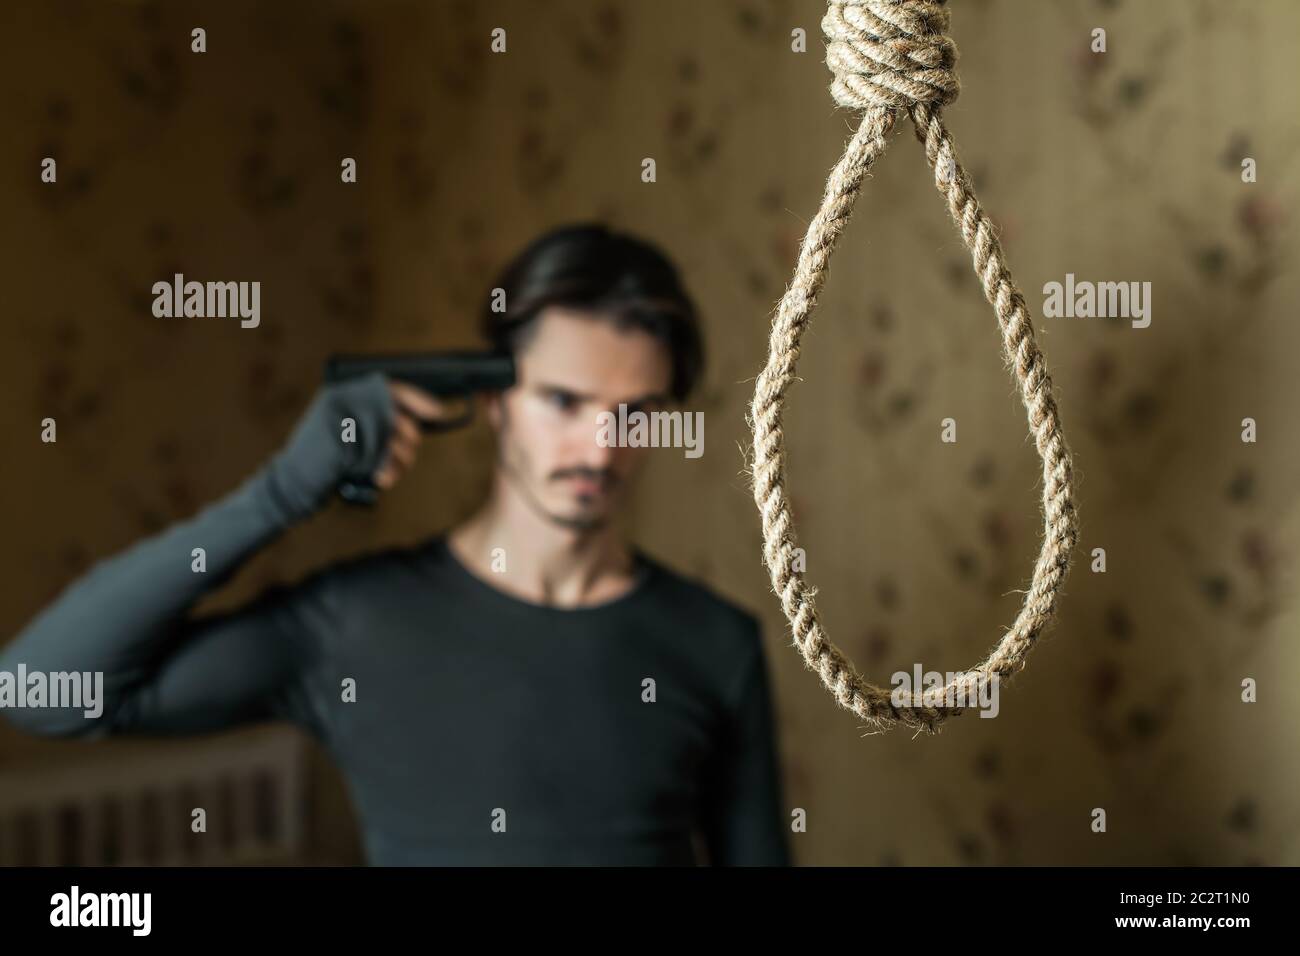 Suicide concept, depressed man prepaping to commit suicide with a shot in the head. Stock Photo